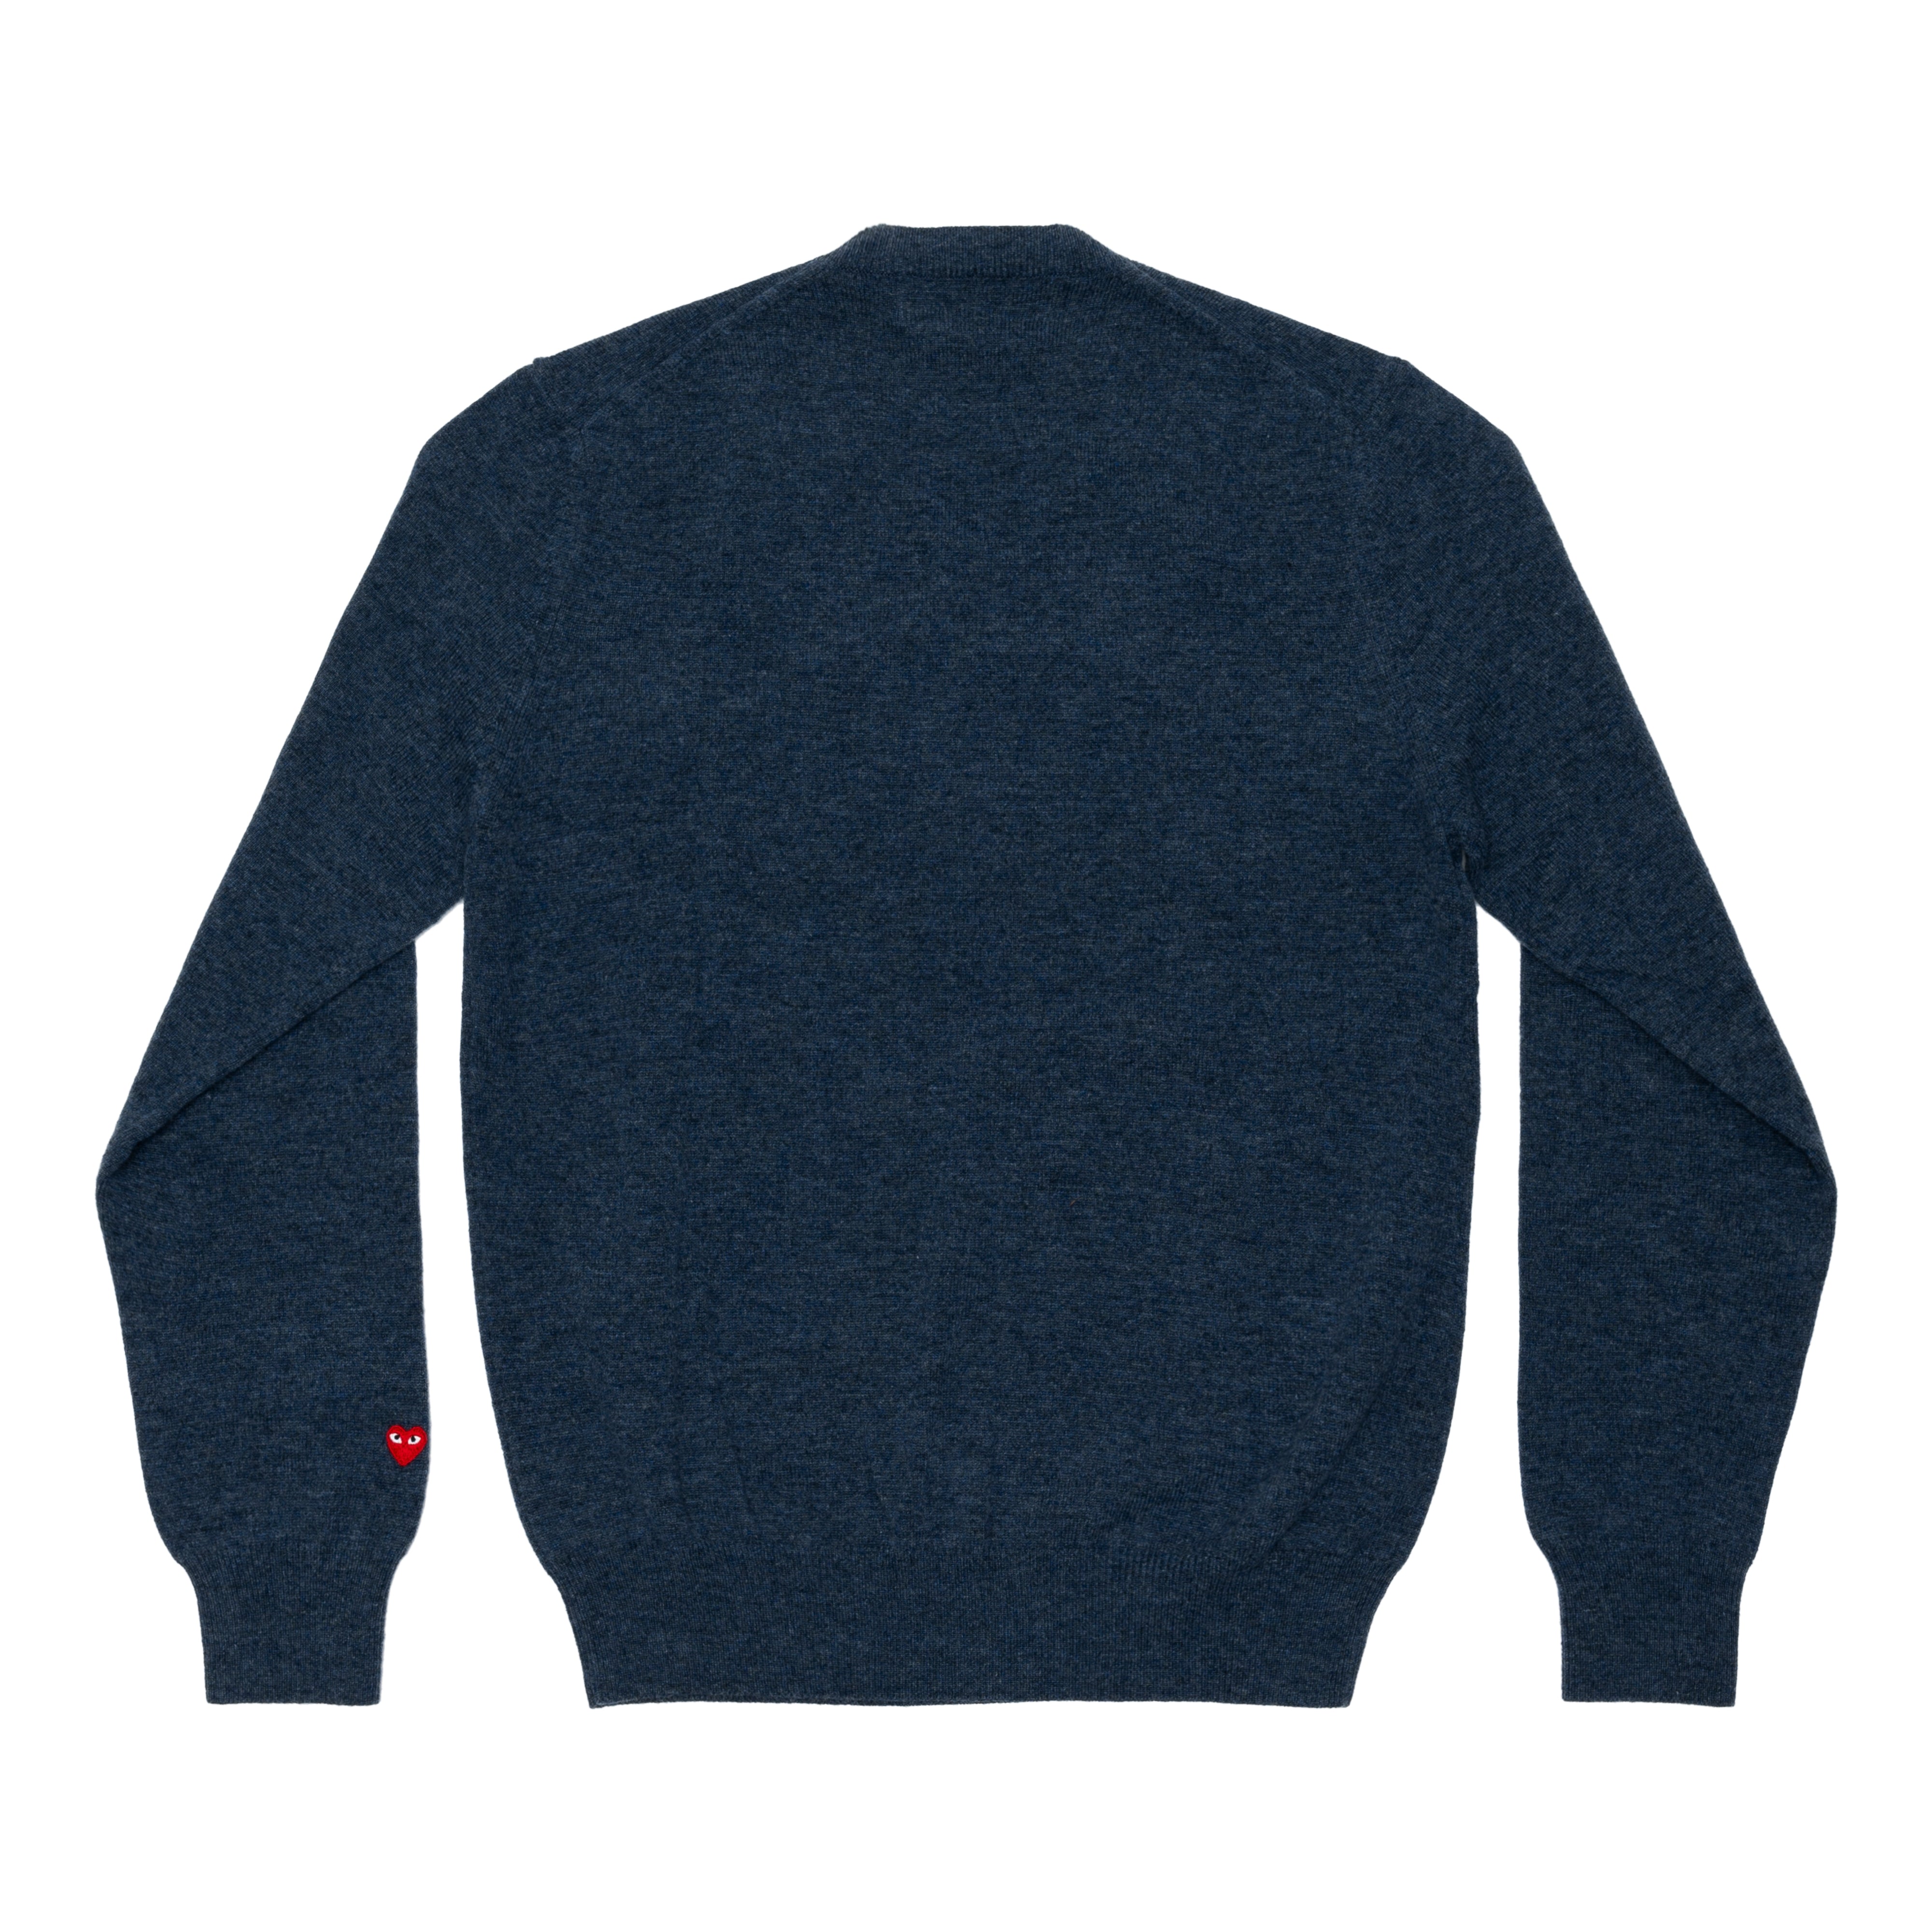 PLAY CDG - Top Dyed Carded Lambswool V Neck Sweater - (Navy)